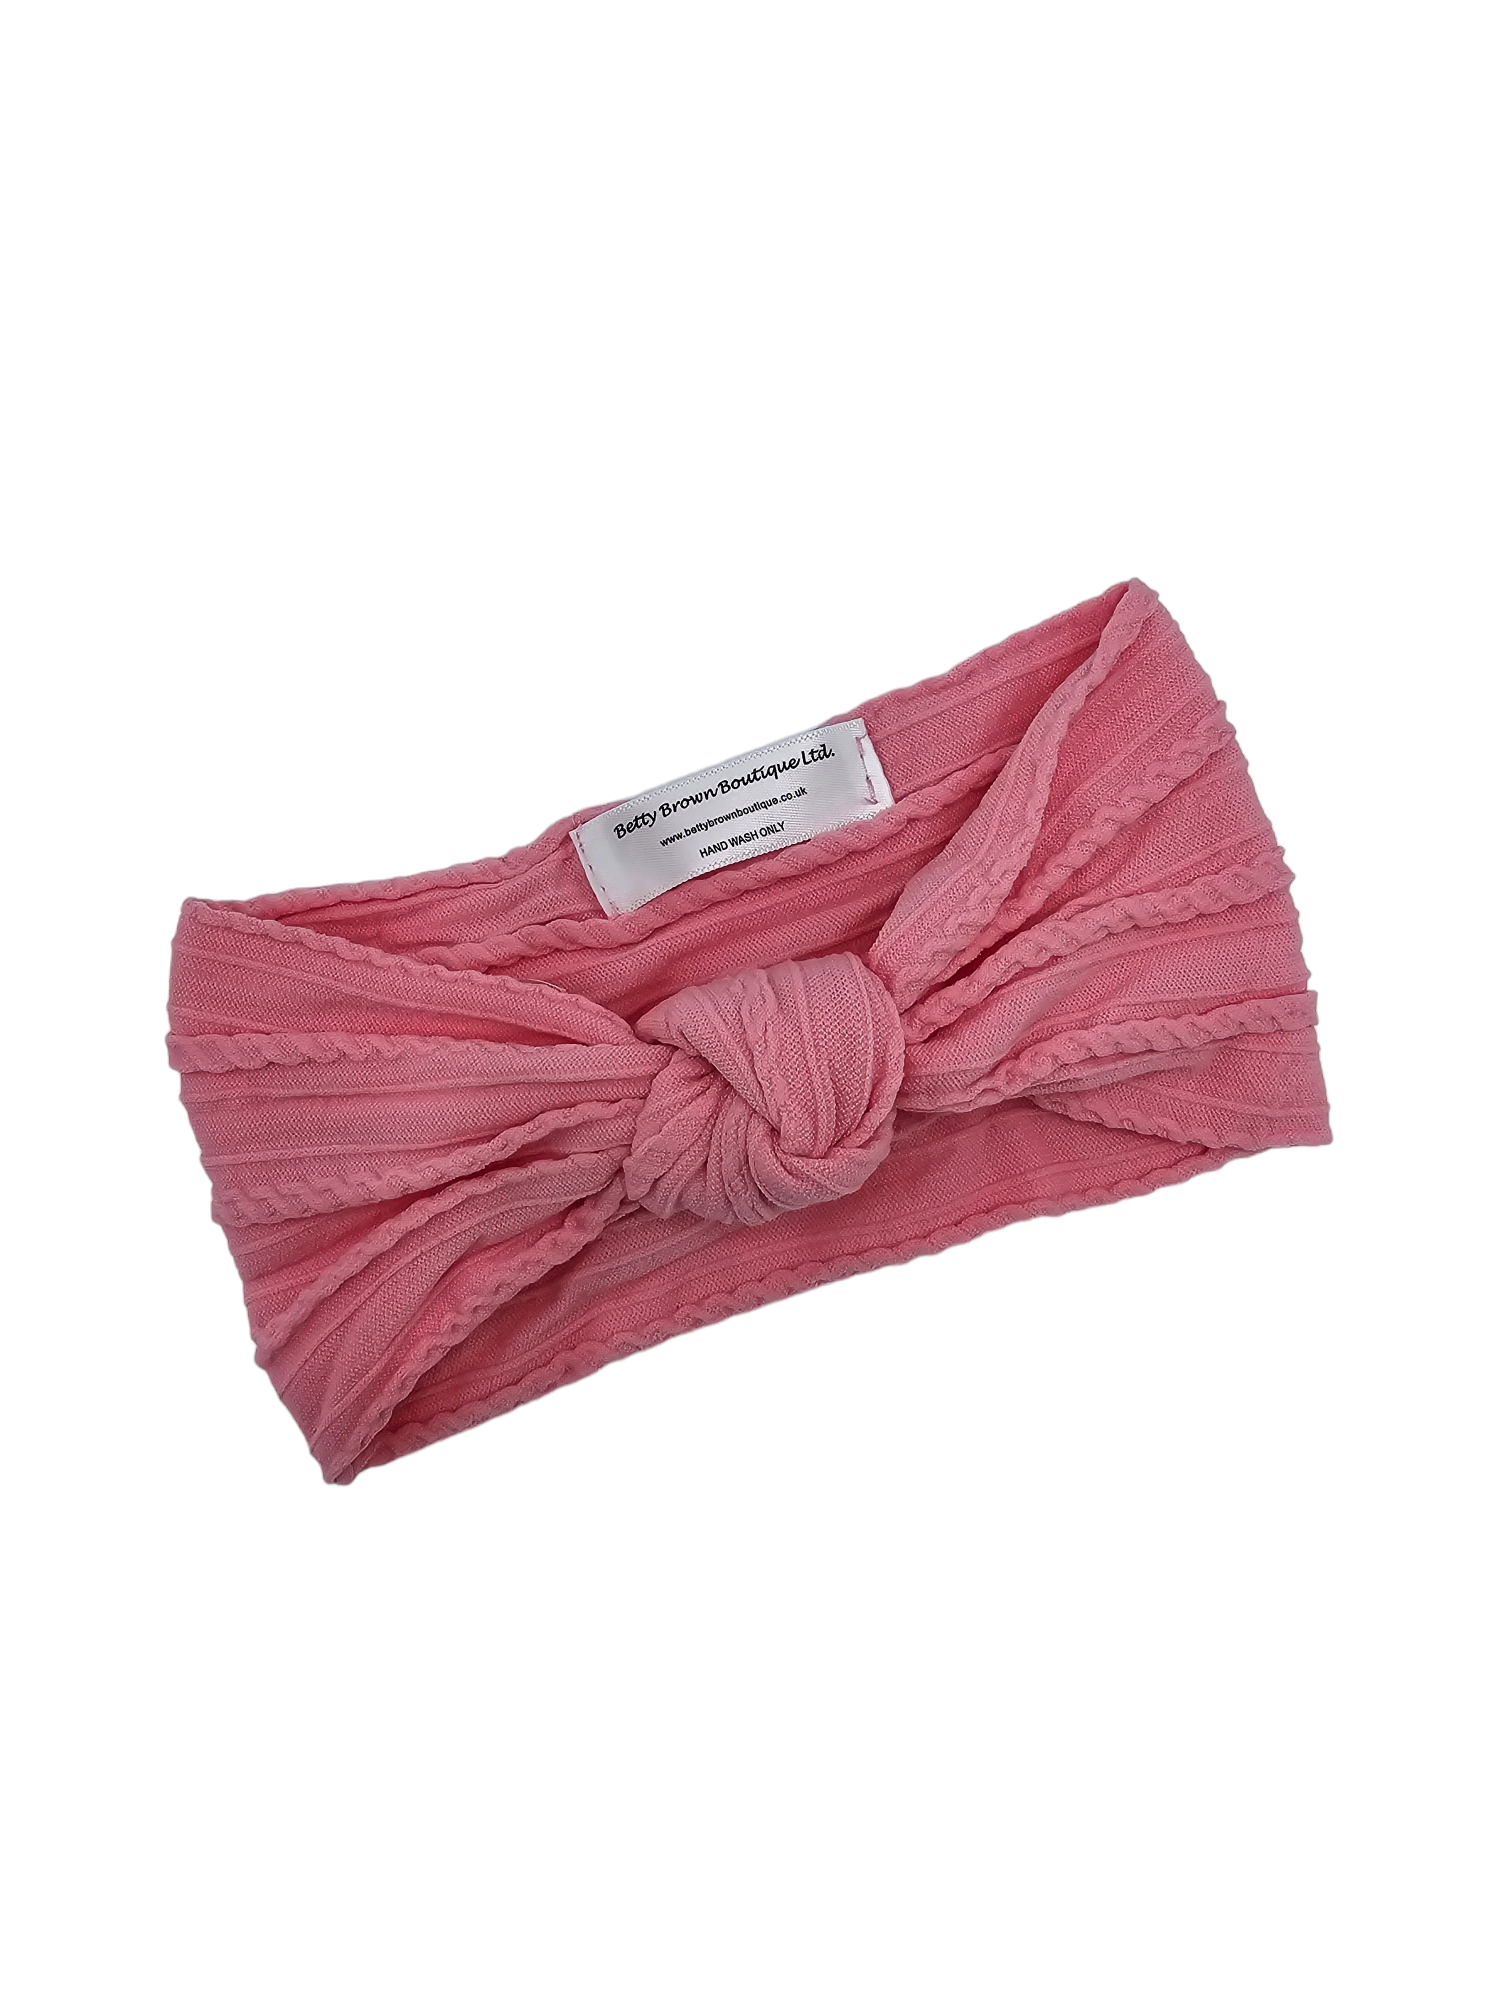 Confetti Pink Cable Knit Knot Headwrap - Betty Brown Boutique Ltd